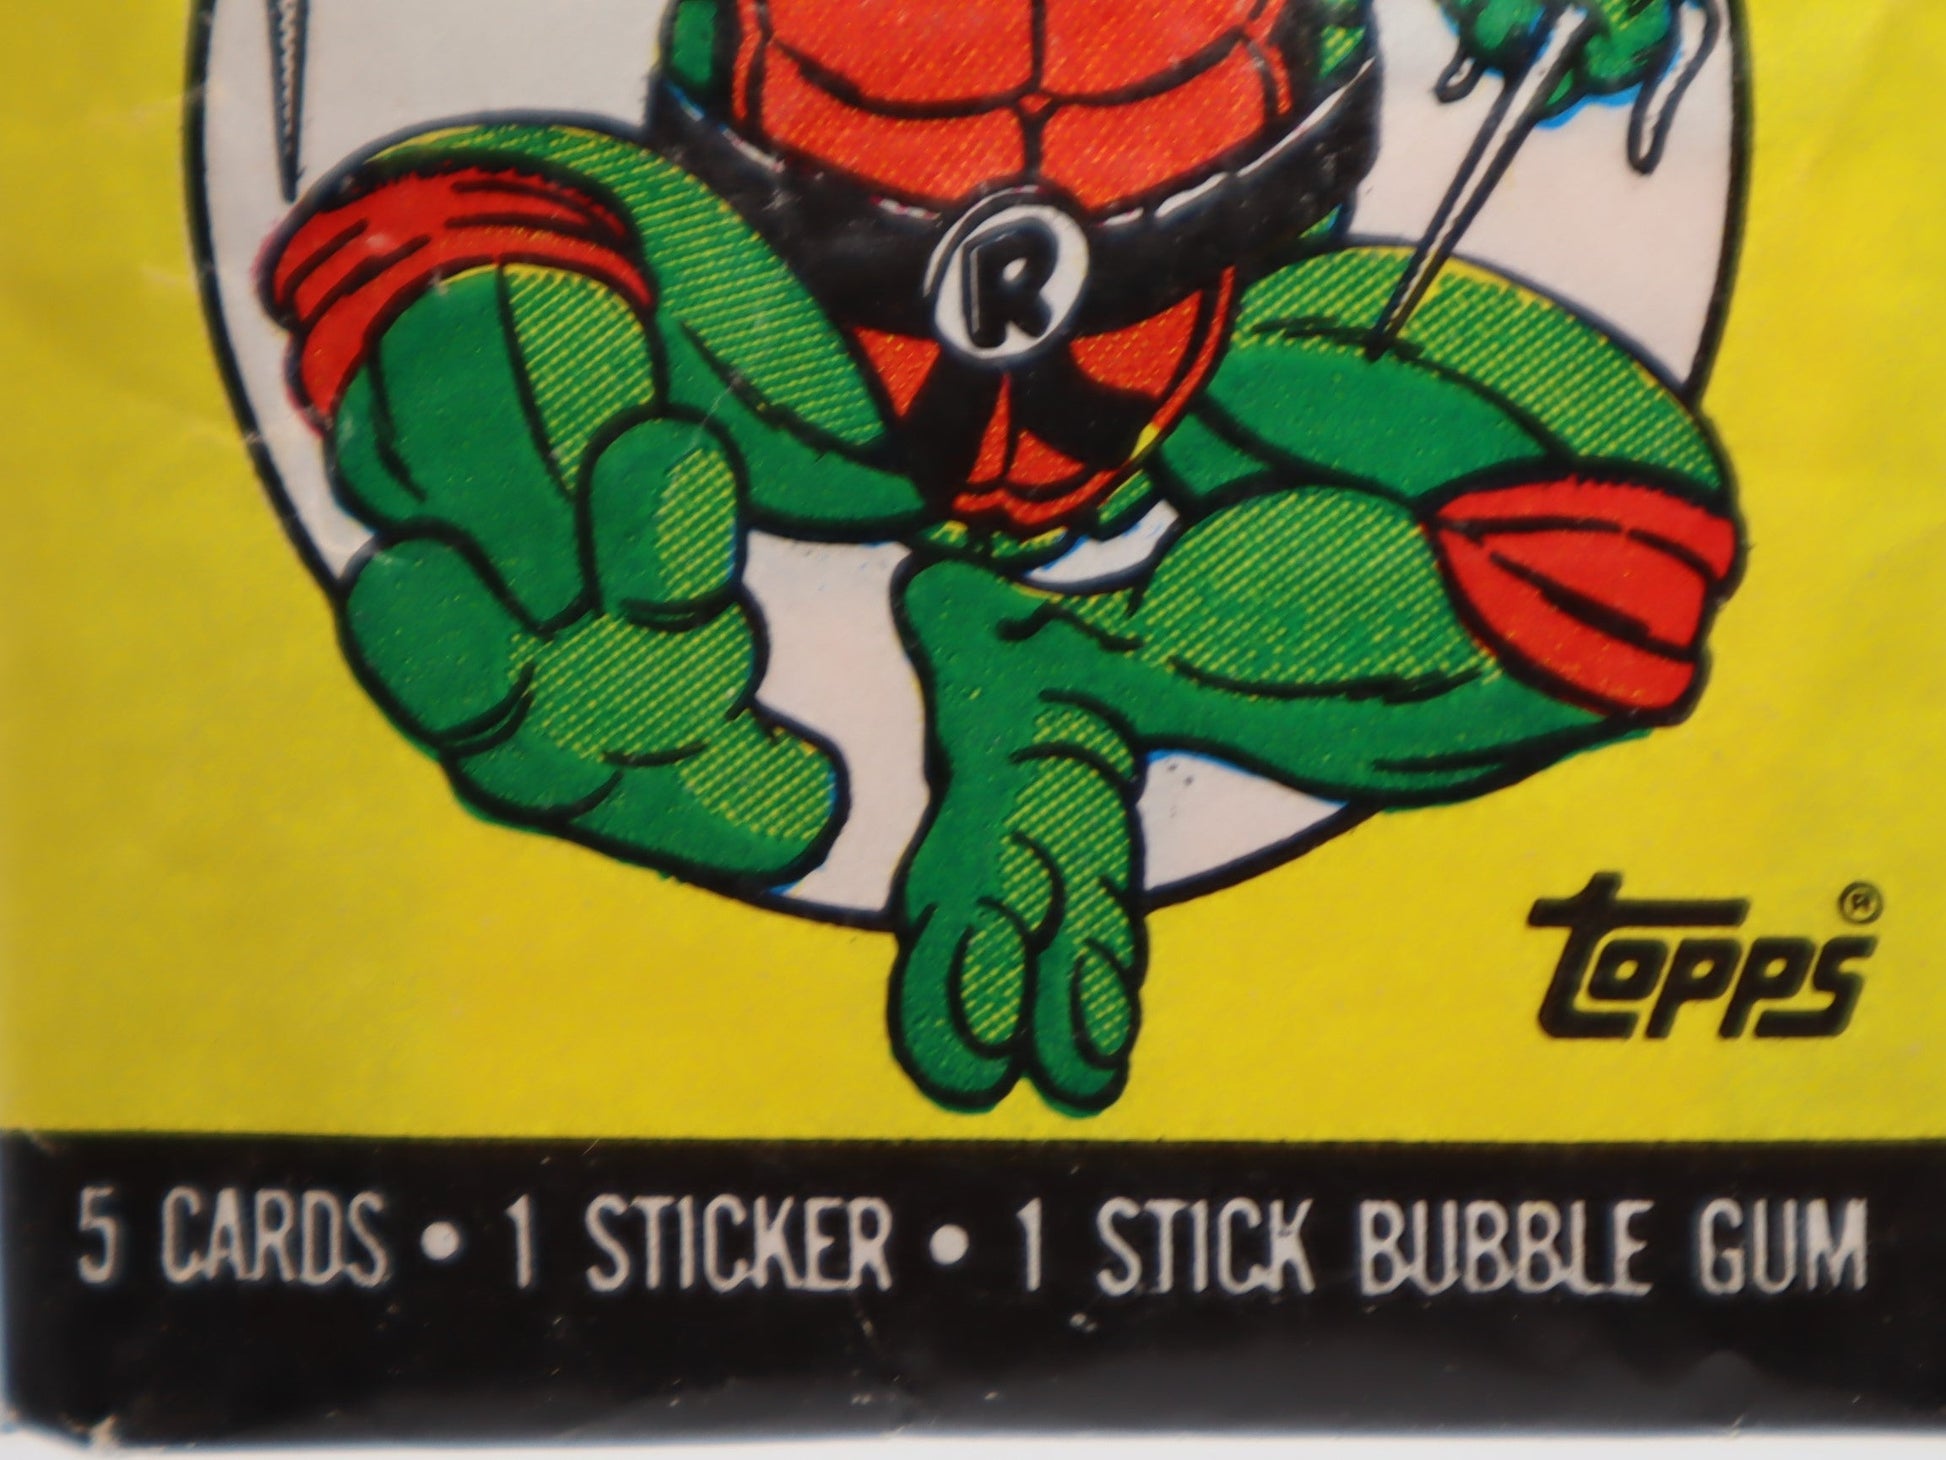 1989 Topps Teenage Mutant Ninja Turtles Trading Cards Wax Pack - Collectibles